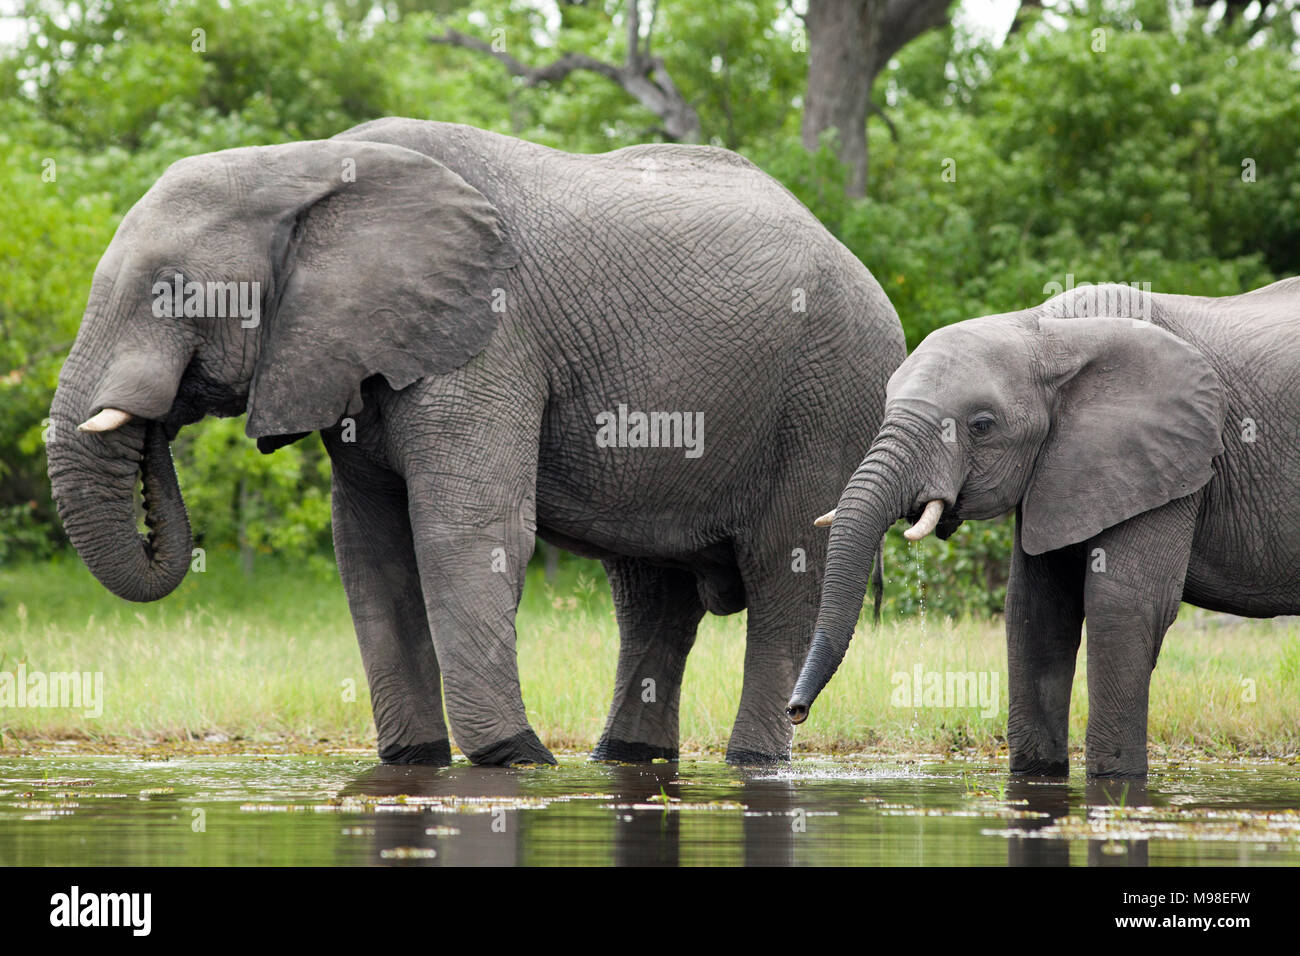 African Elephants (Loxodonta africana). Two of different ages drinking from a river using trunks. Animal on the left has tusk end warn and broken, pos Stock Photo